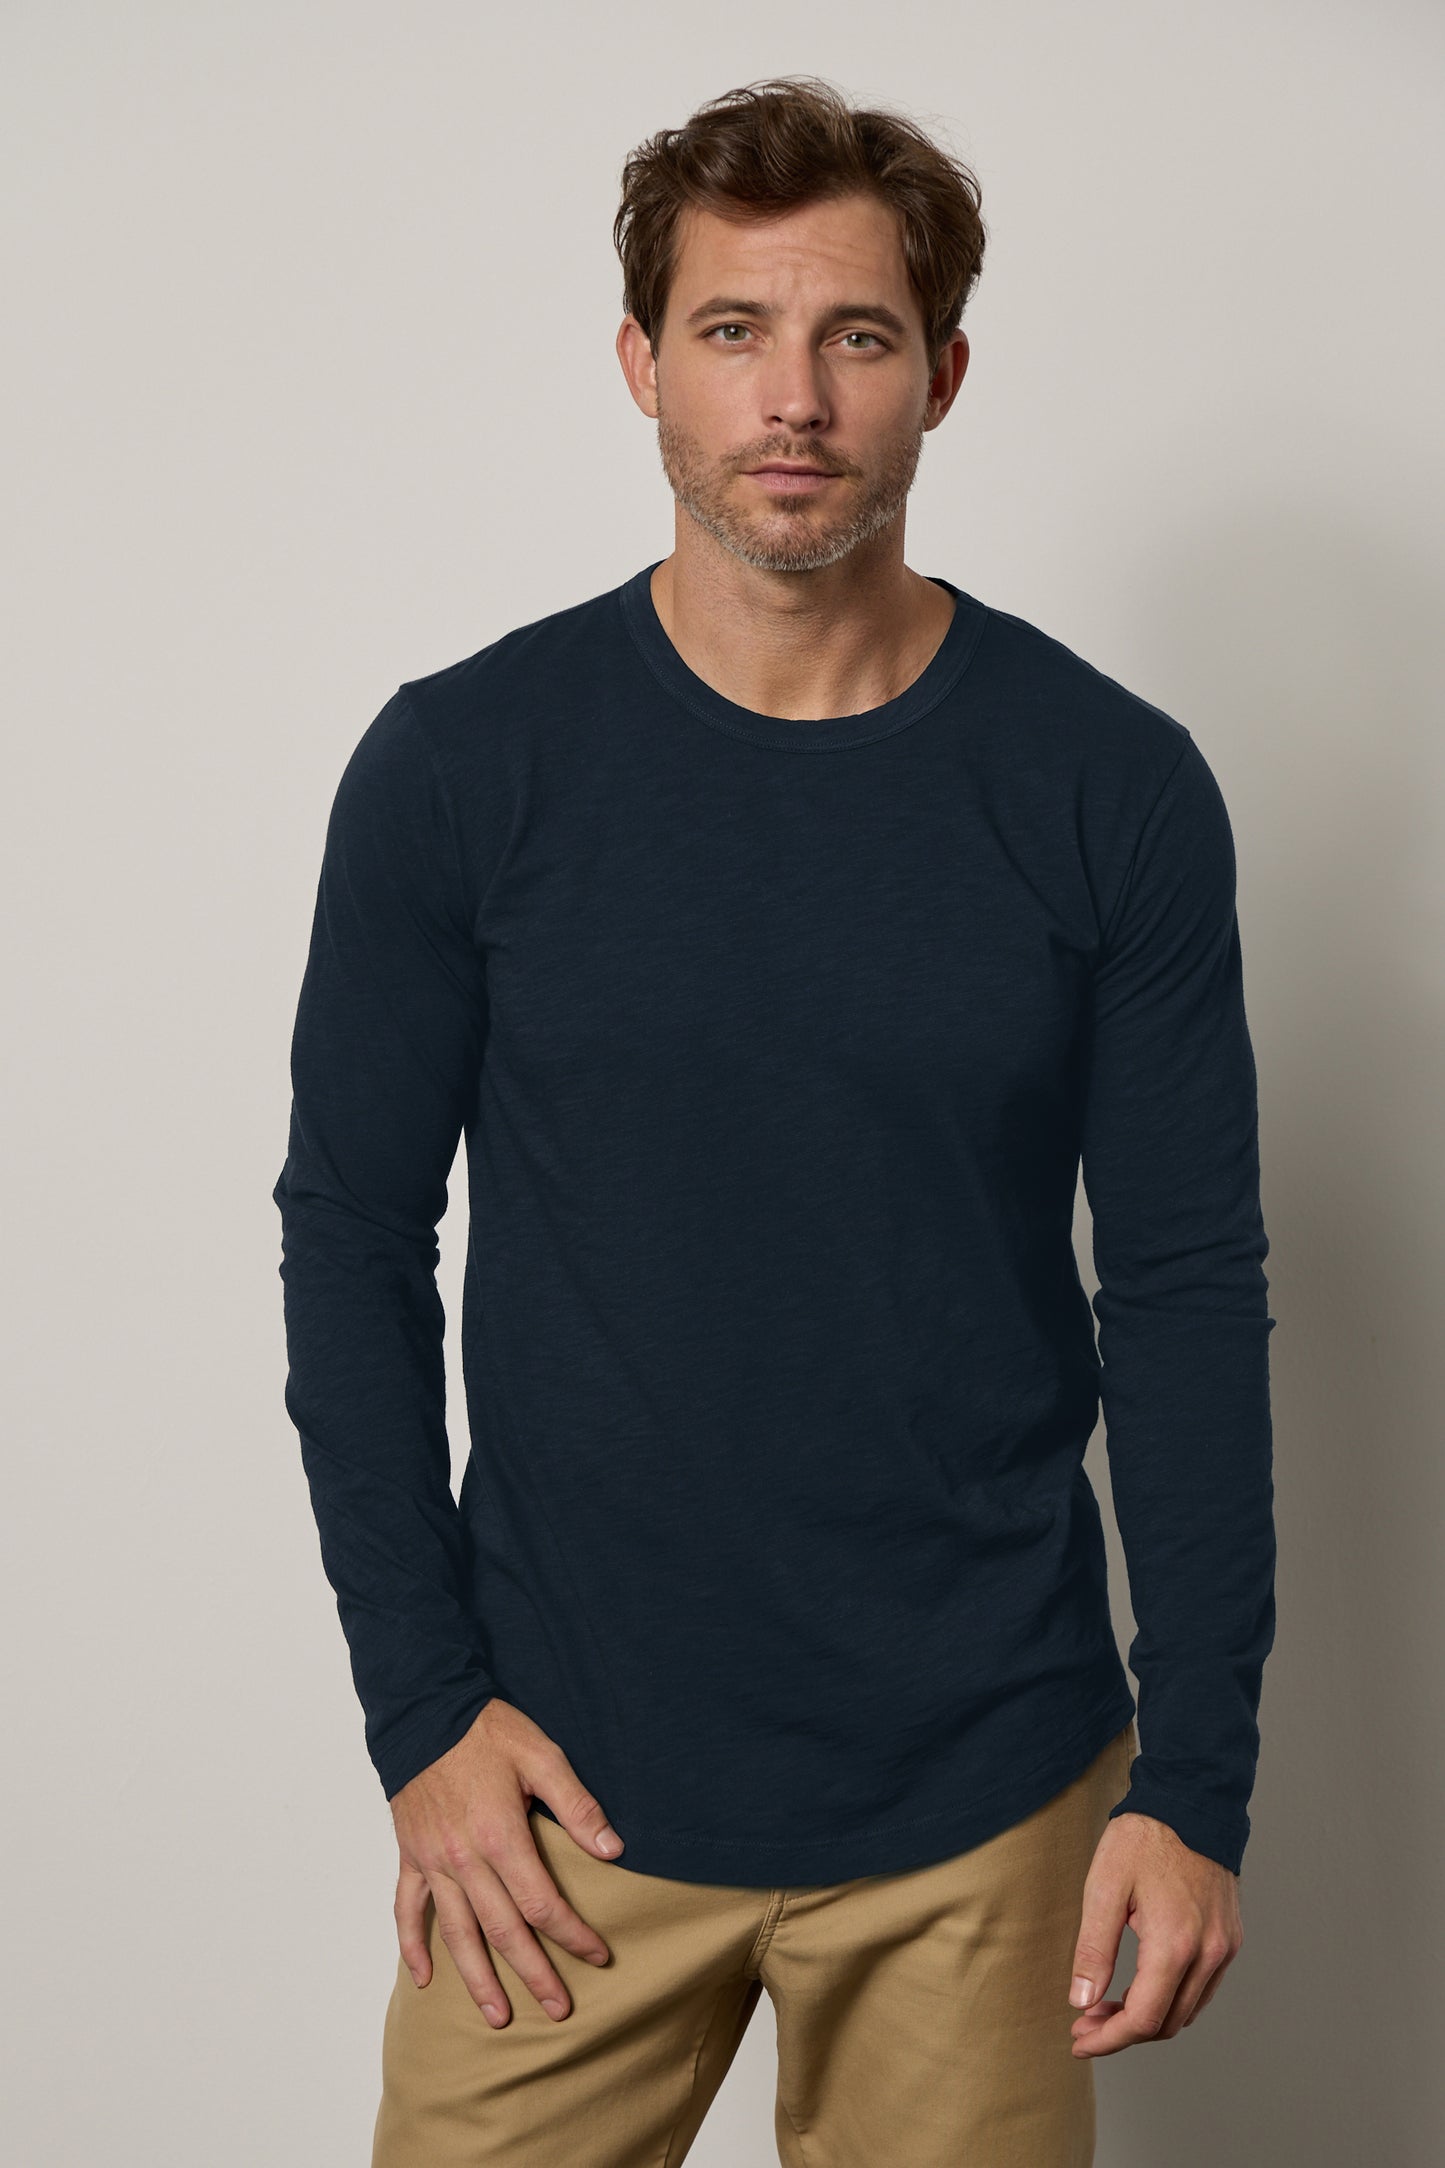 A man wearing a flawless fit Velvet by Graham & Spencer KAI CREW NECK TEE navy long sleeve t-shirt.-35607579197633